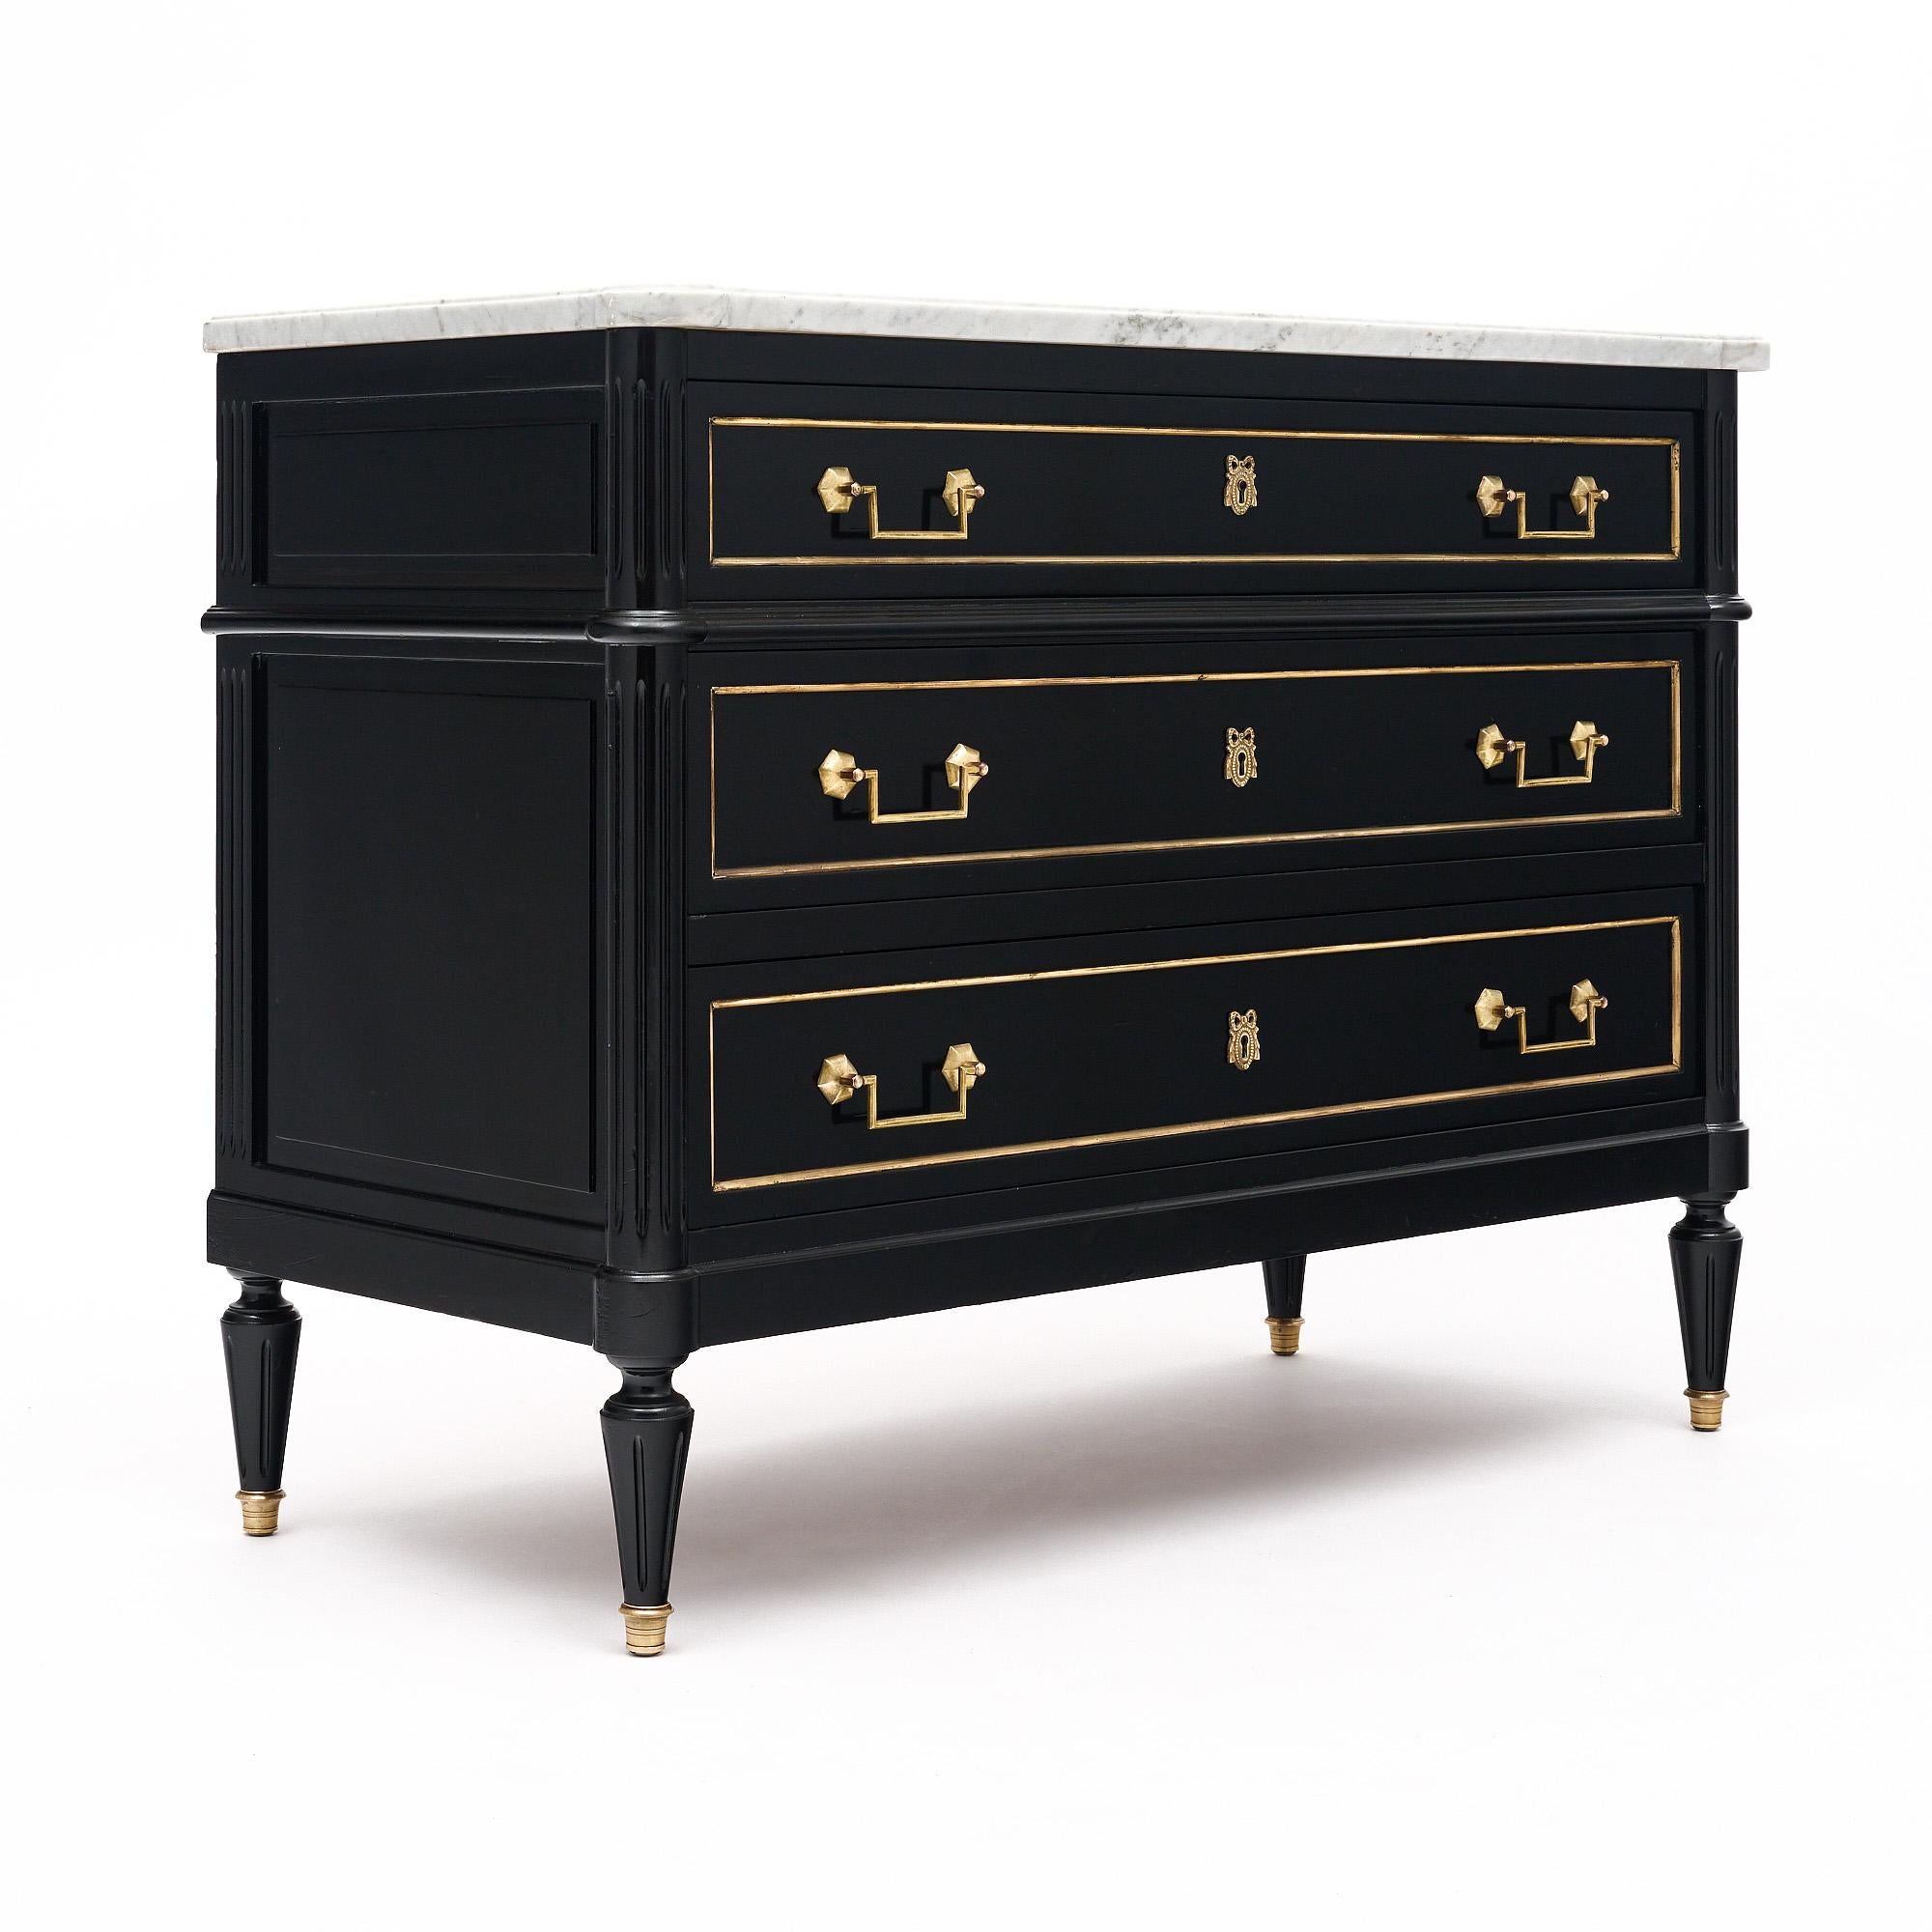 Chest of drawers from France in the Louis XVI style. This piece is made of mahogany that has been fully ebonized and finished with a lustrous French polish of museum-quality. There are three dovetailed drawers all featuring cast brass trim and